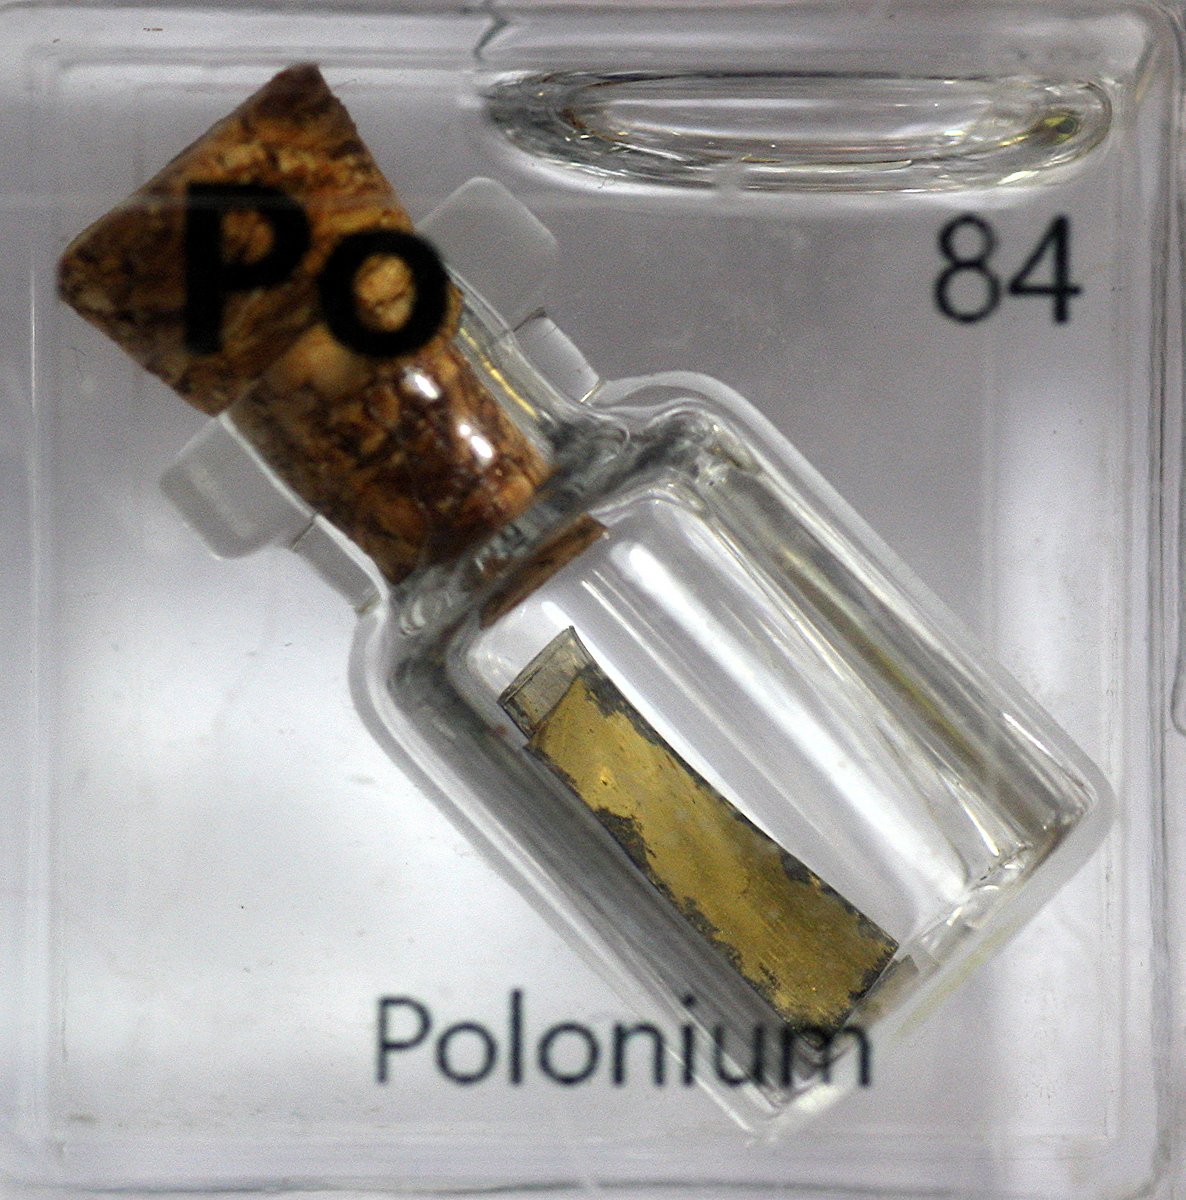 Polonium  #elementphotos. All isotopes of Po are radioactive, and the only source of Po I could find were "Staticmaster" brushes, like the one shown below. These contain Po-210 strips emit alpha particles which ionise the air and help remove static on e.g. vinyl records. 1/2